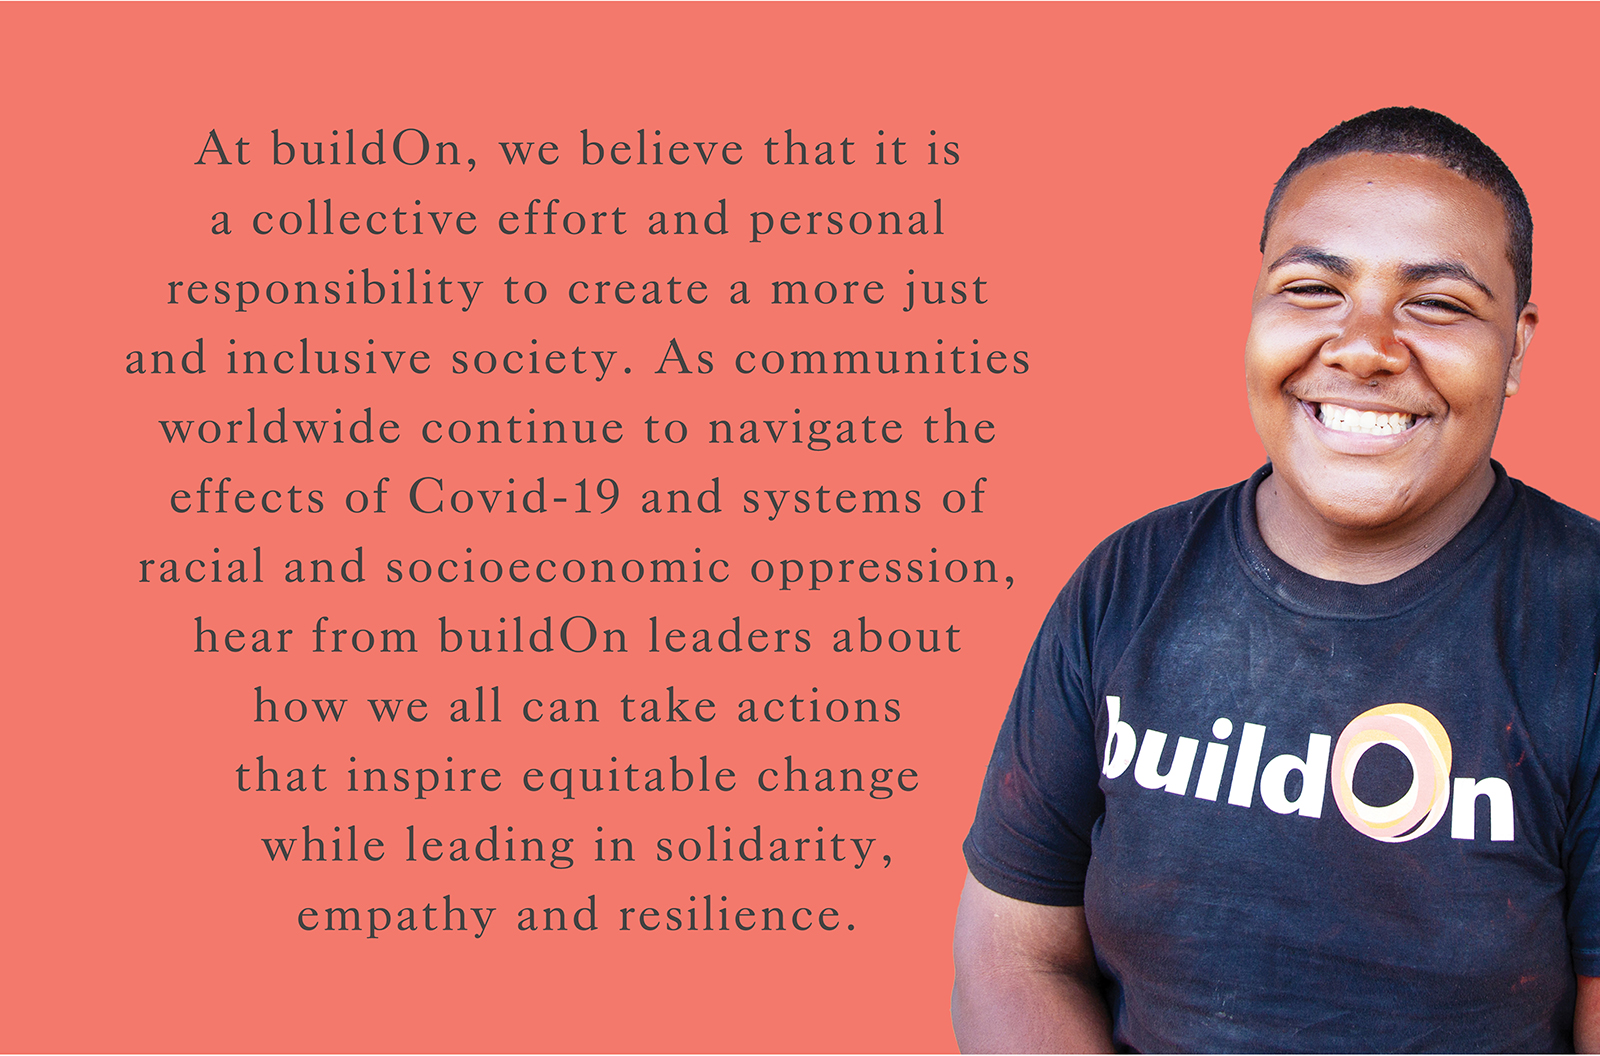 At buildOn, we believe that it is a collective effort and personal responsibility to create a more just and inclusive society